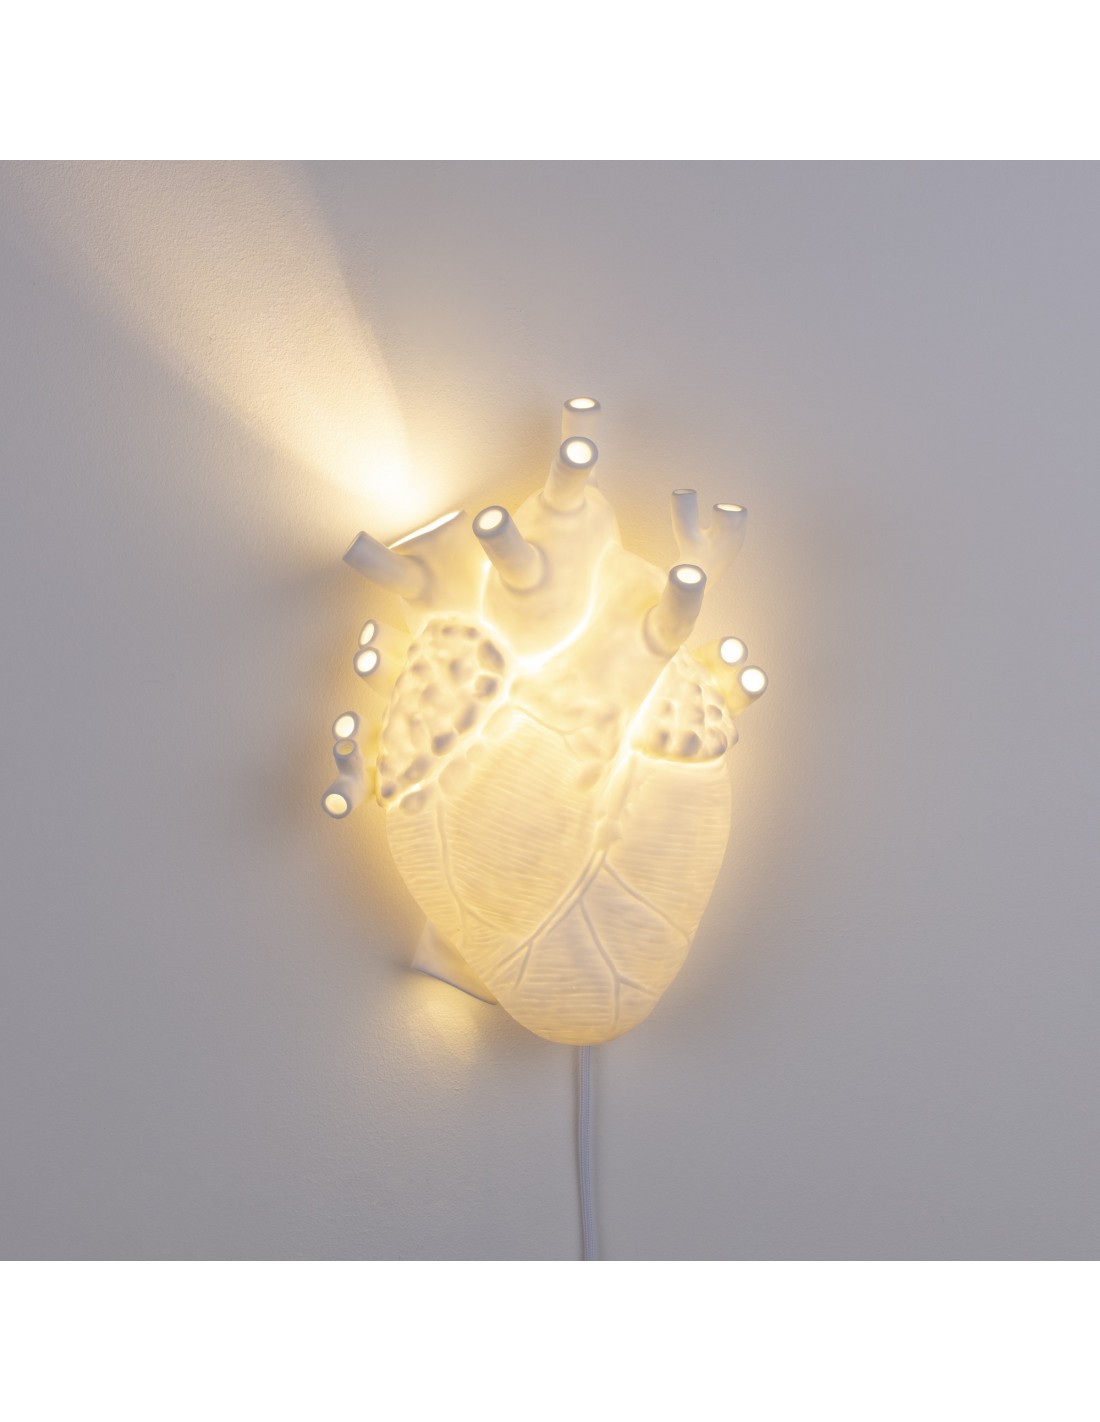 Buy SELETTI Heart Lamp - Wall online? Fast and safe